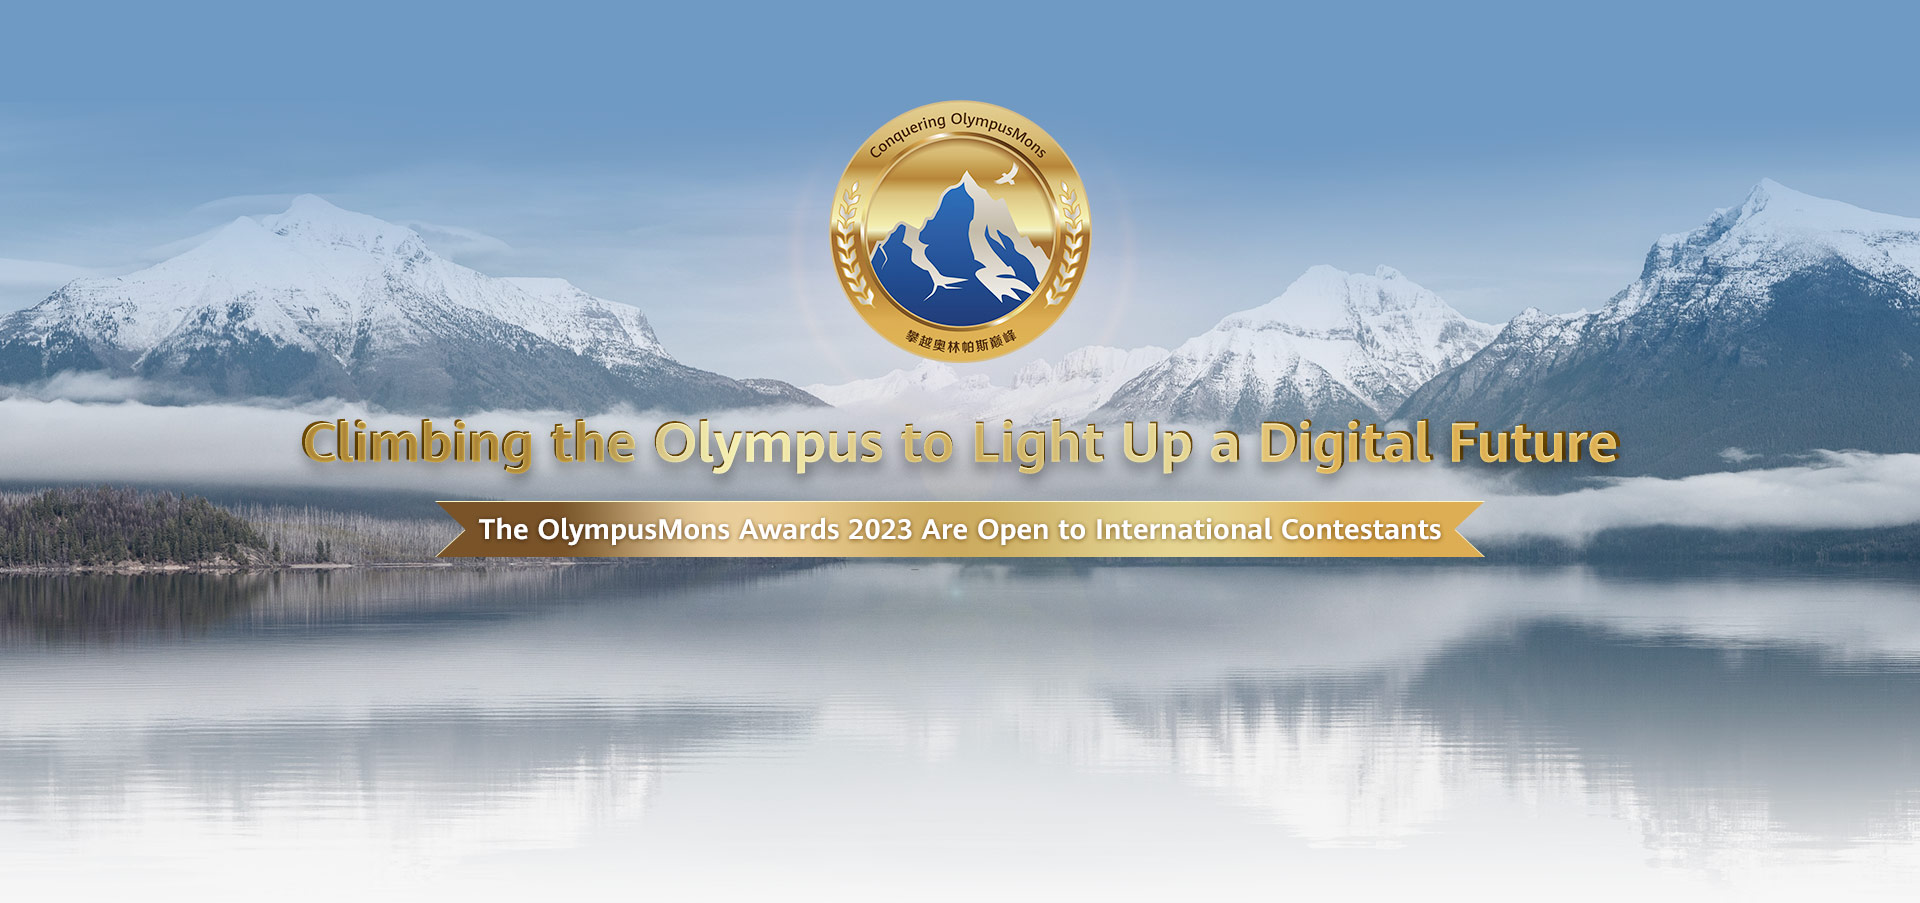 The OlympusMons Awards 2023 Are Open to International Contestants
                